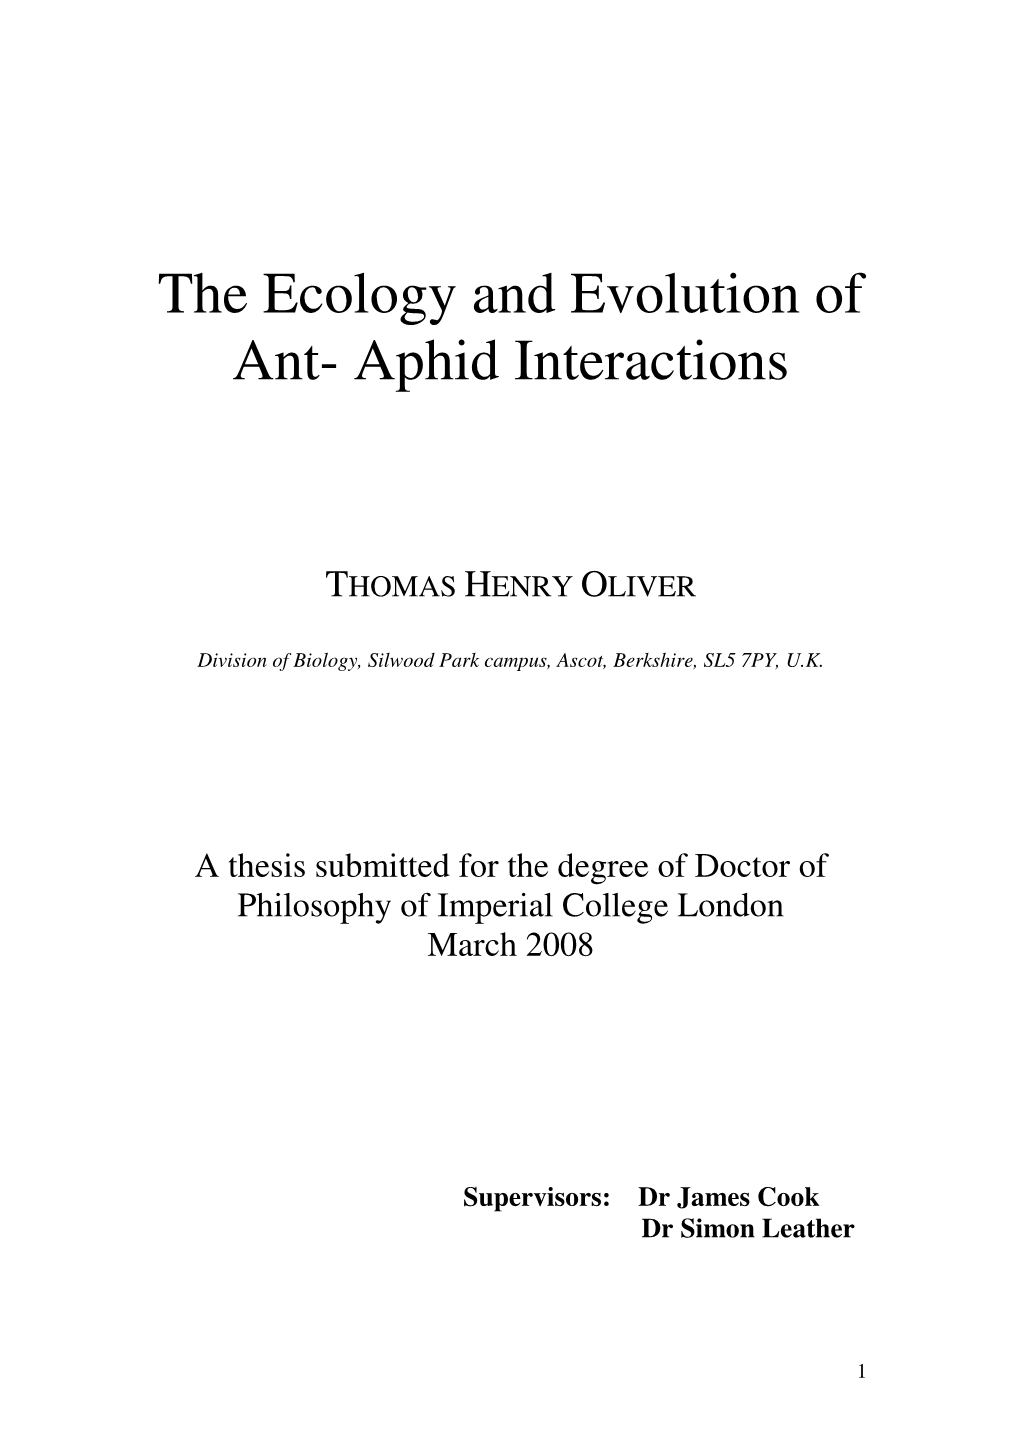 The Ecology and Evolution of Ant- Aphid Interactions